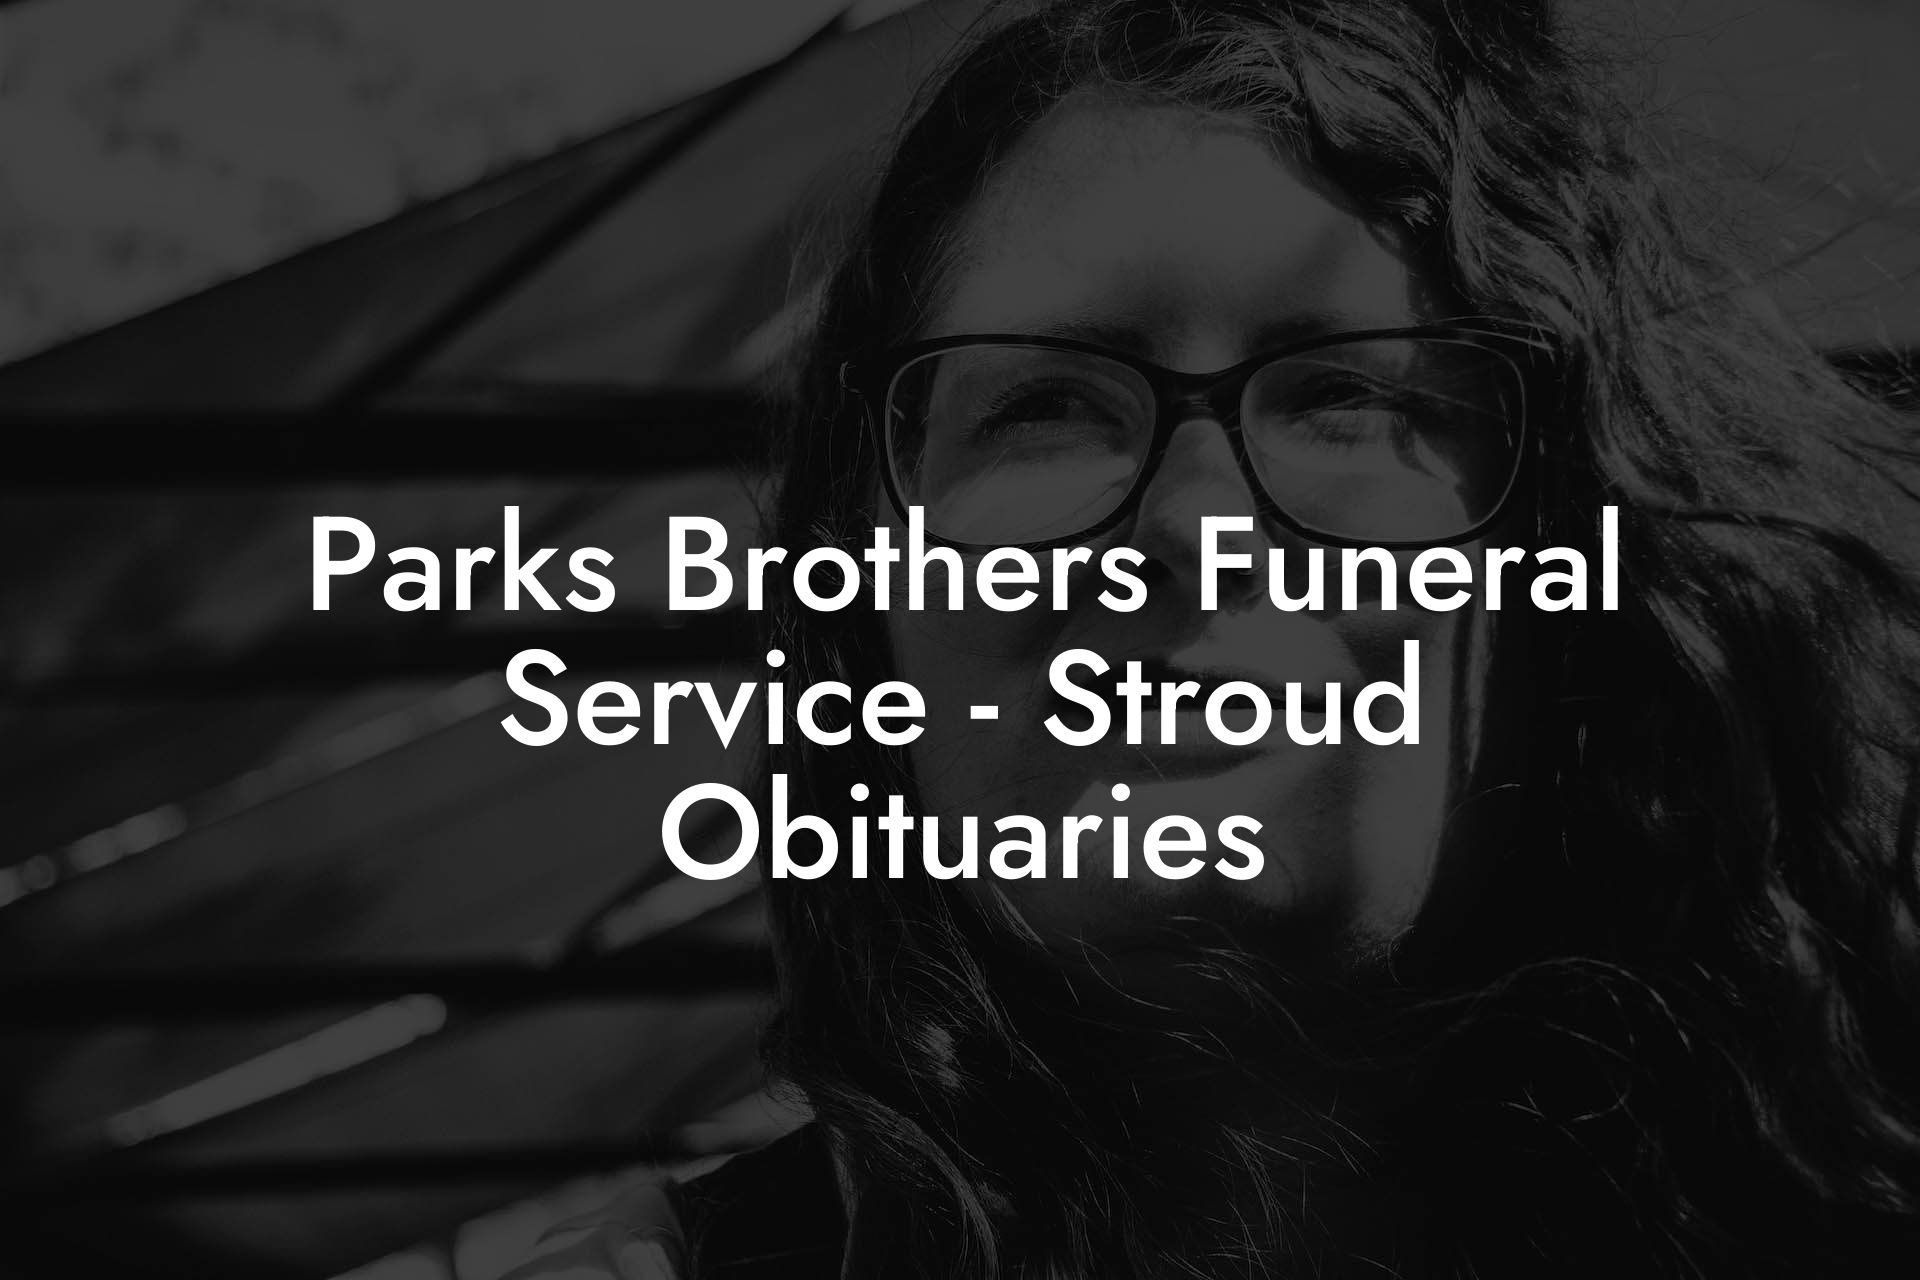 Parks Brothers Funeral Service - Stroud Obituaries